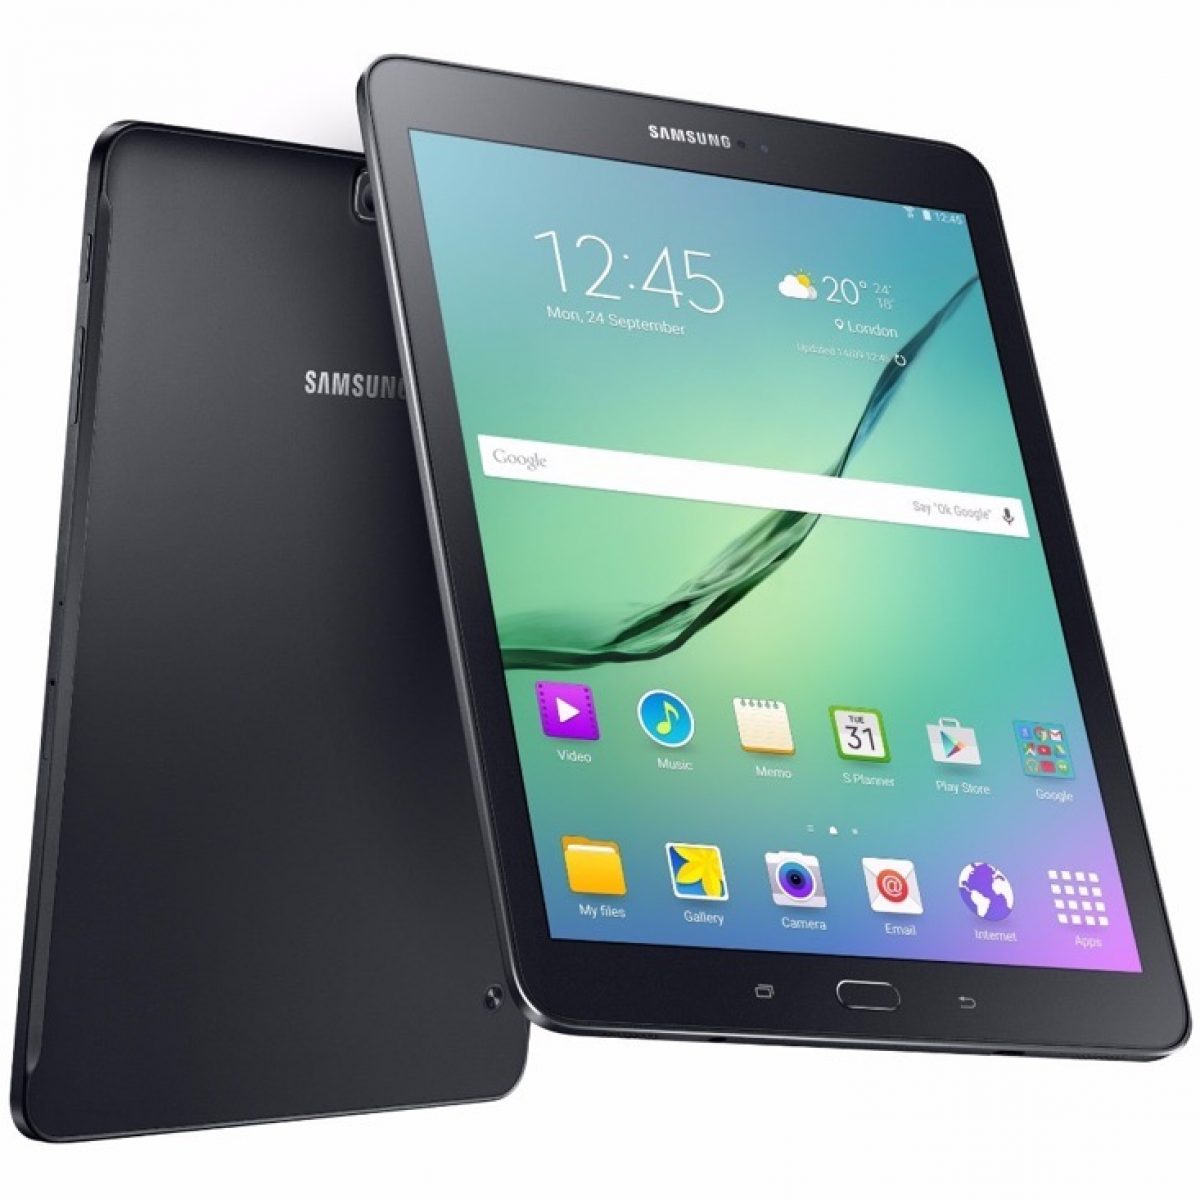 Stadscentrum Onverenigbaar herhaling Samsung Announces Galaxy Tab S2 9.7 and 8.0 With Impossibly Thin 5.6mm  Frames